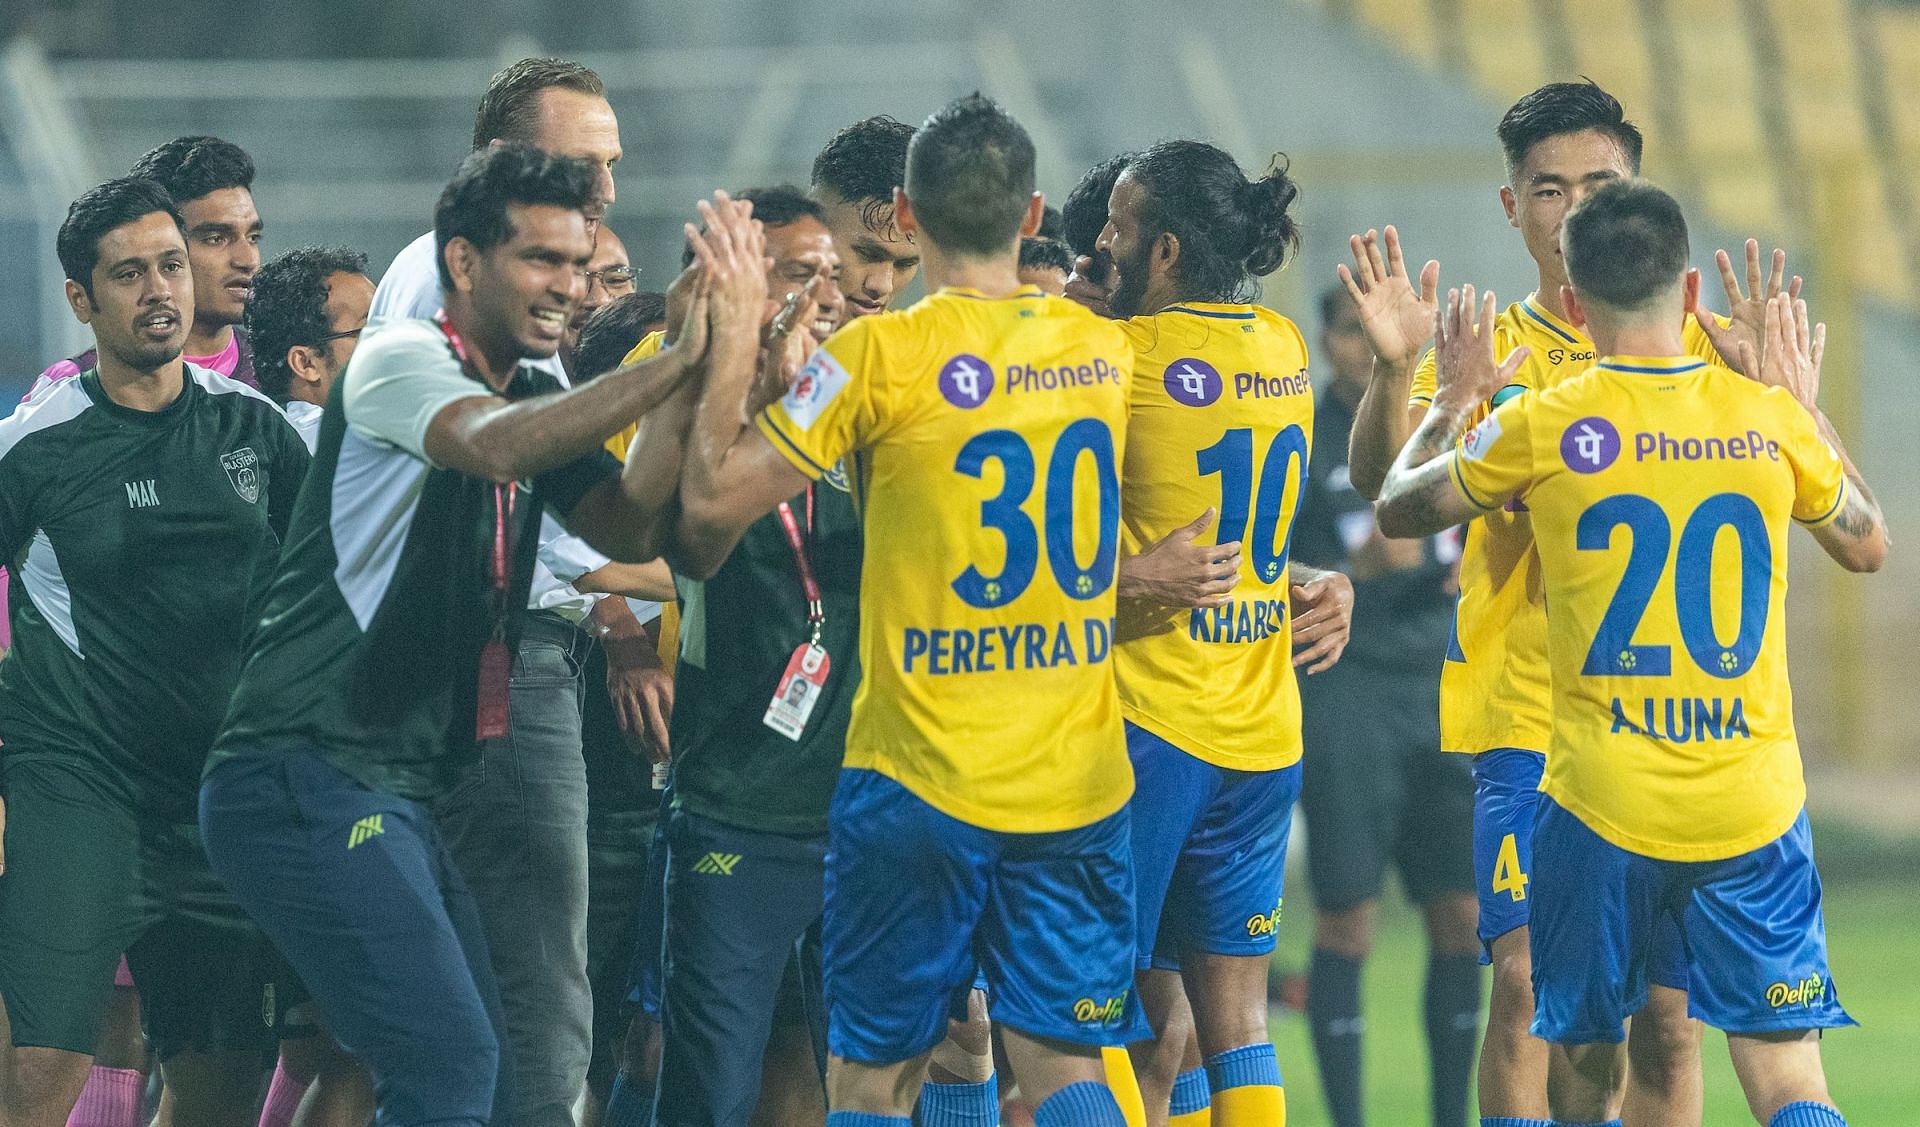 The Kerala Blasters players celebrating their victory. (Image Courtesy: Twitter/IndSuperLeague)